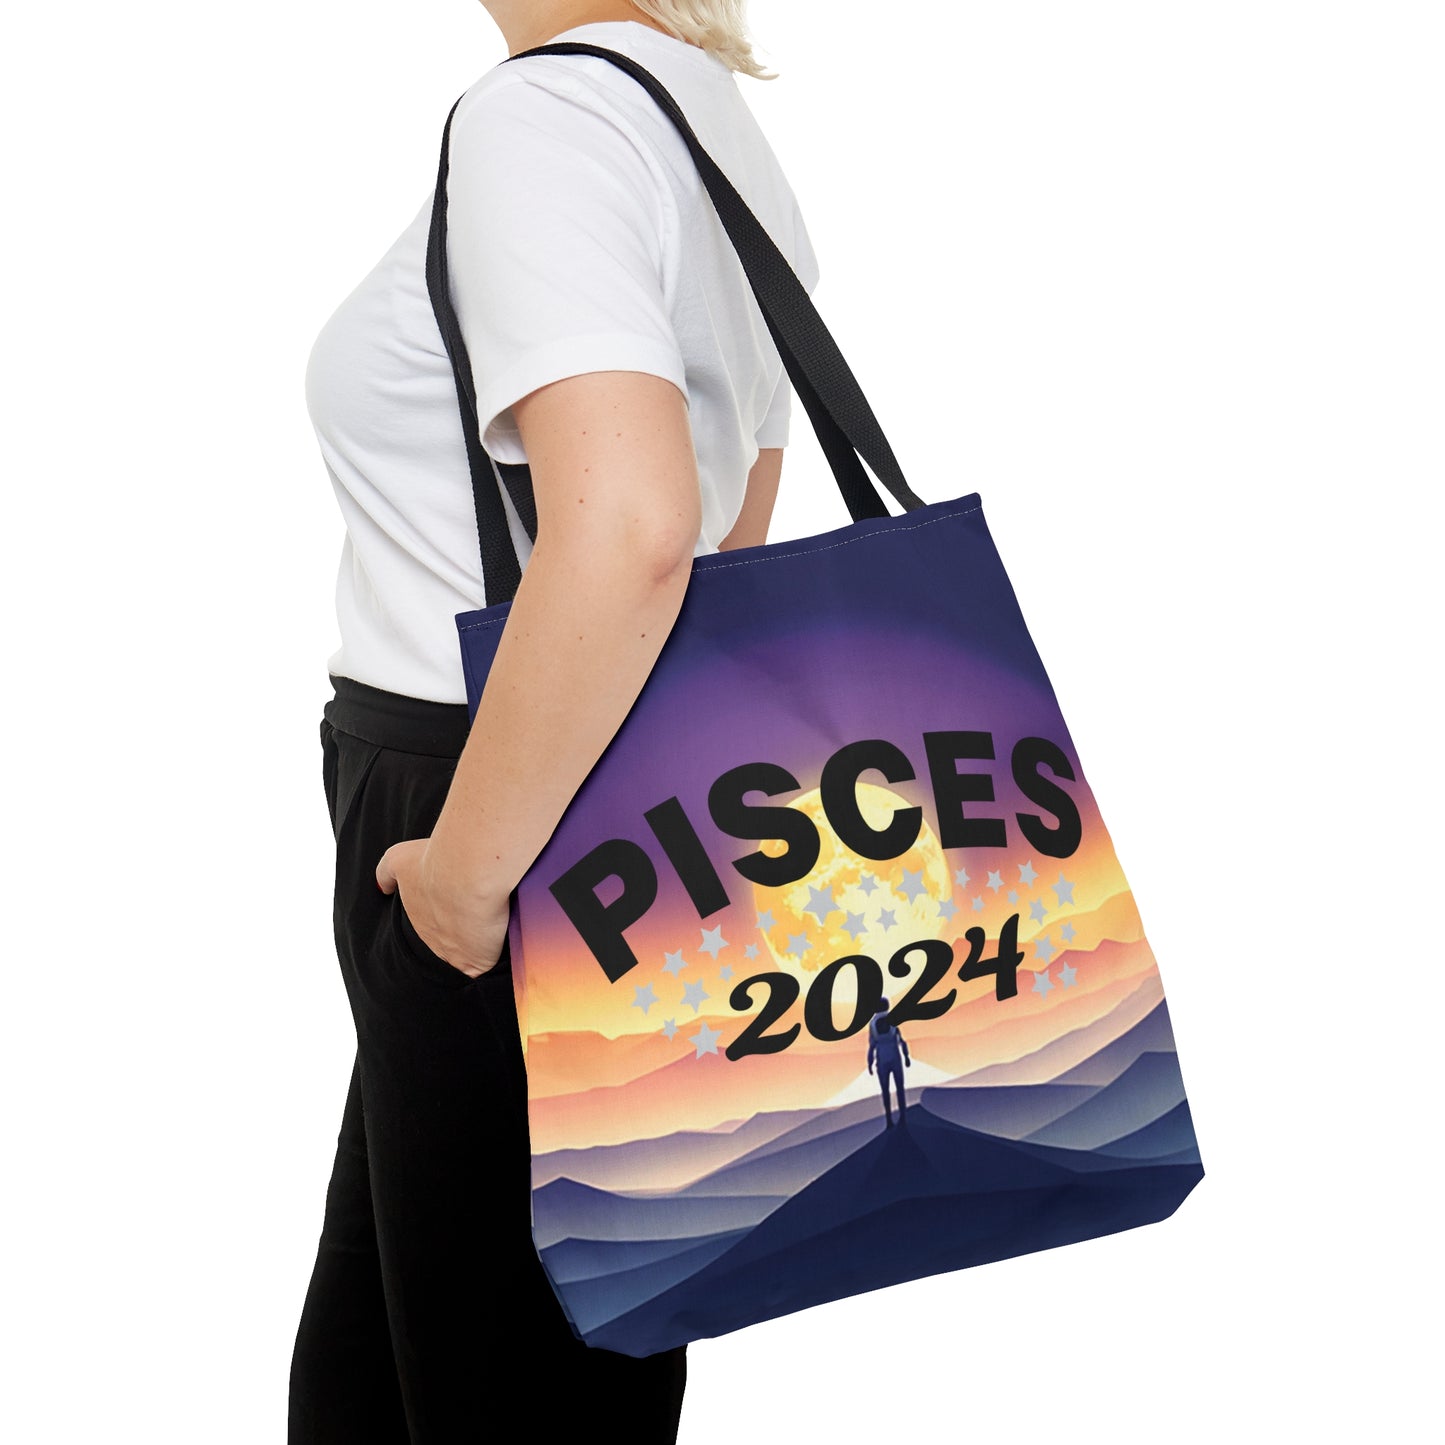 Pisces 2024 Tote Bag